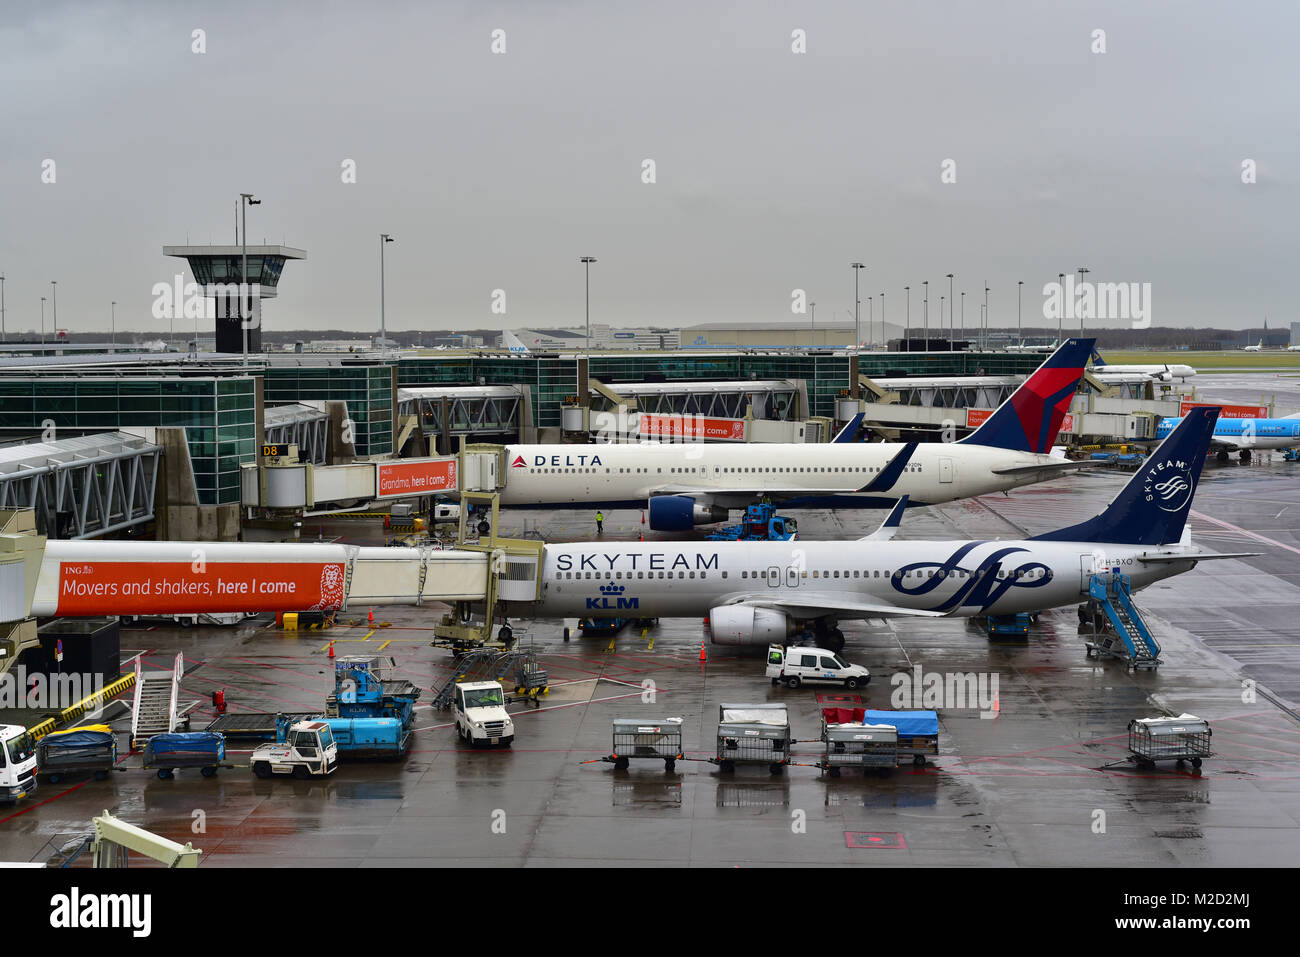 SkyTeam, KLM Royal Dutch Airlines at Amsterdam Schipol airport Stock Photo